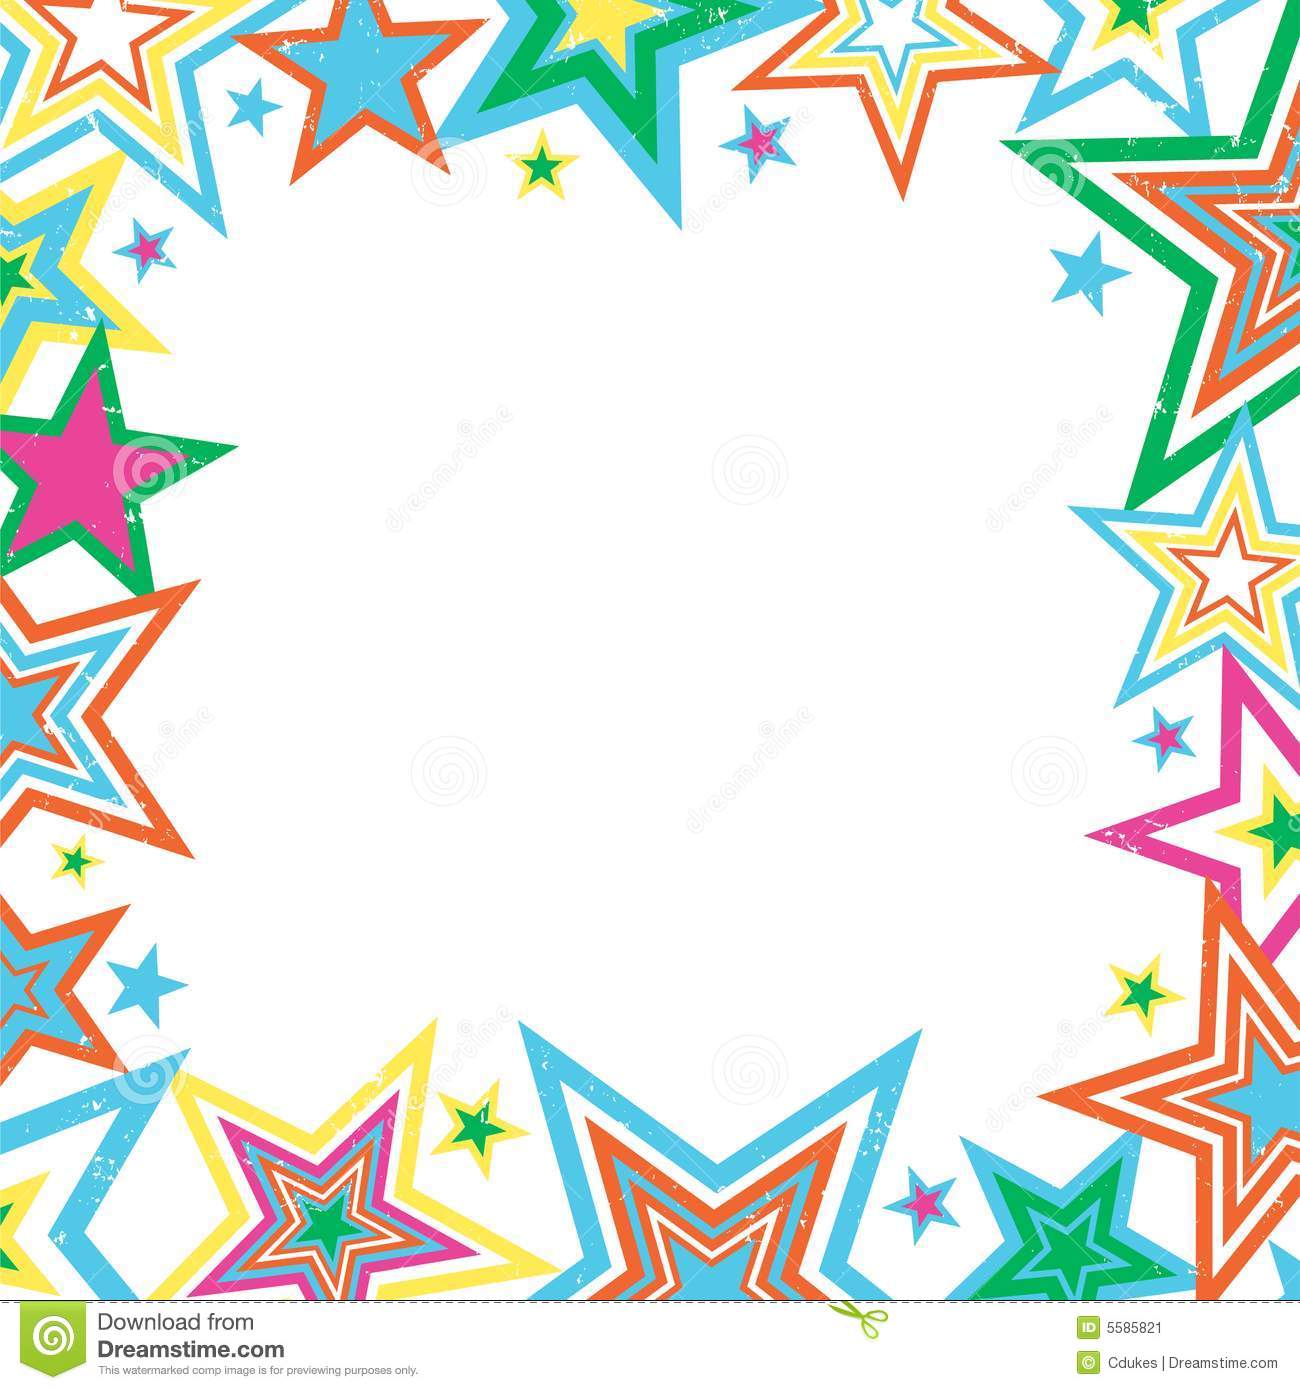 Illustration Of Bright Stars Border On White Background With Space For